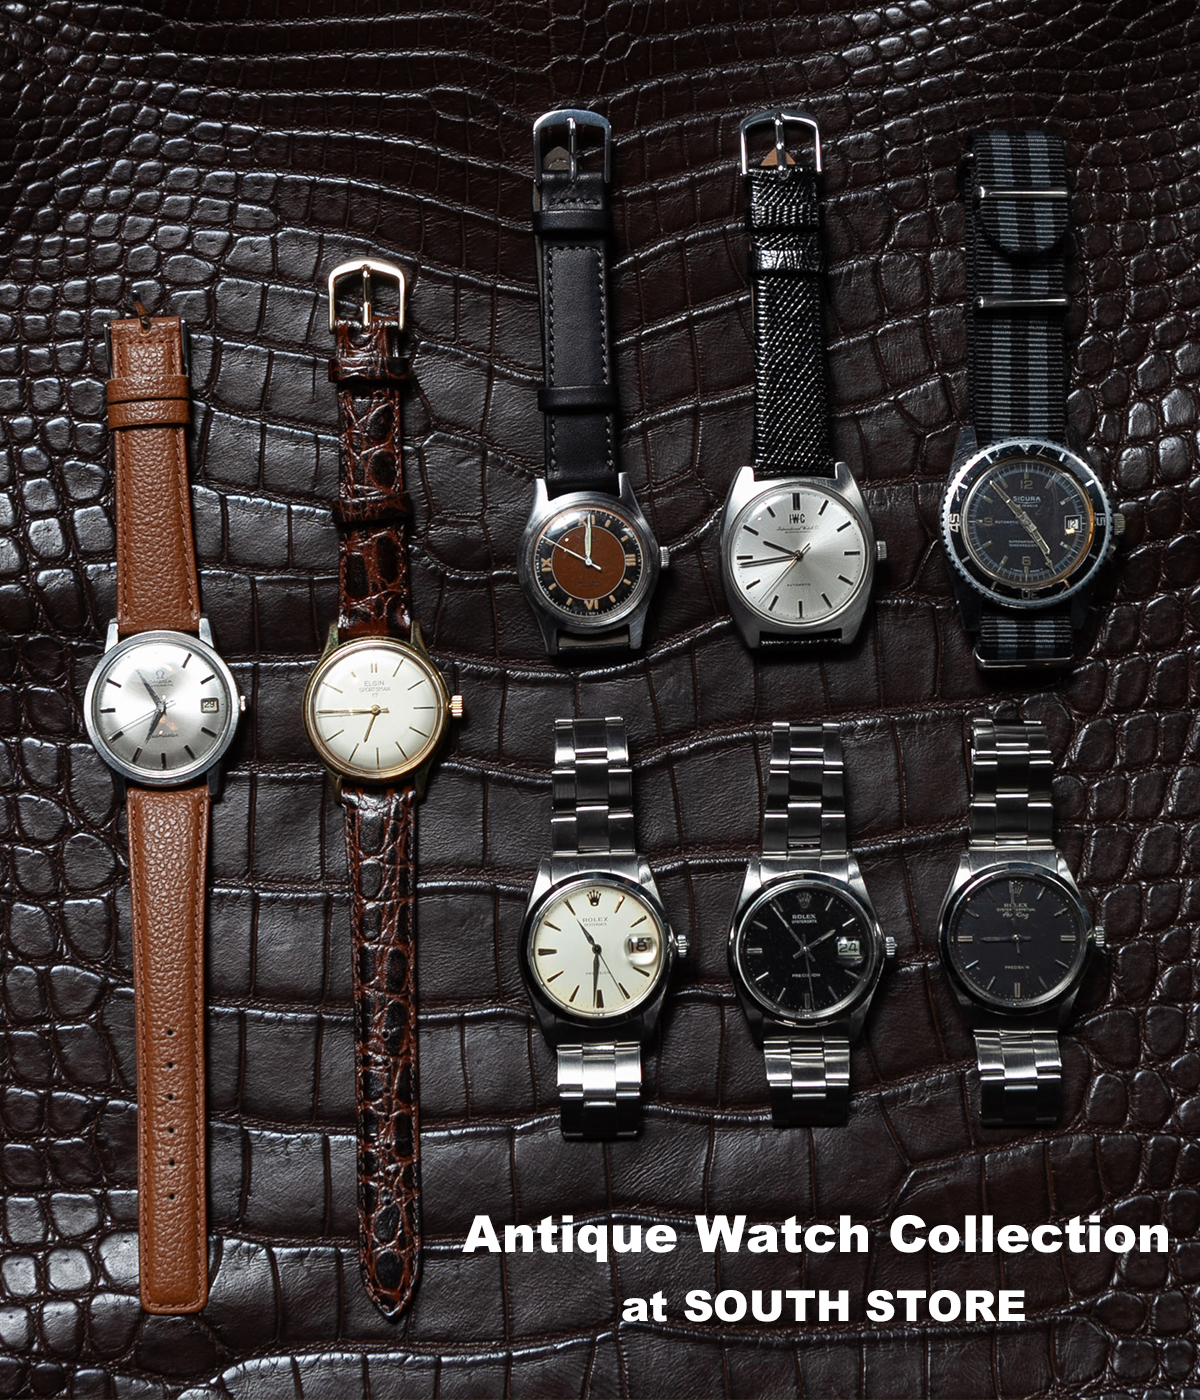 ANTIQUE WATCH COLLECTION at SOUTH STORE - SOUTH STORE